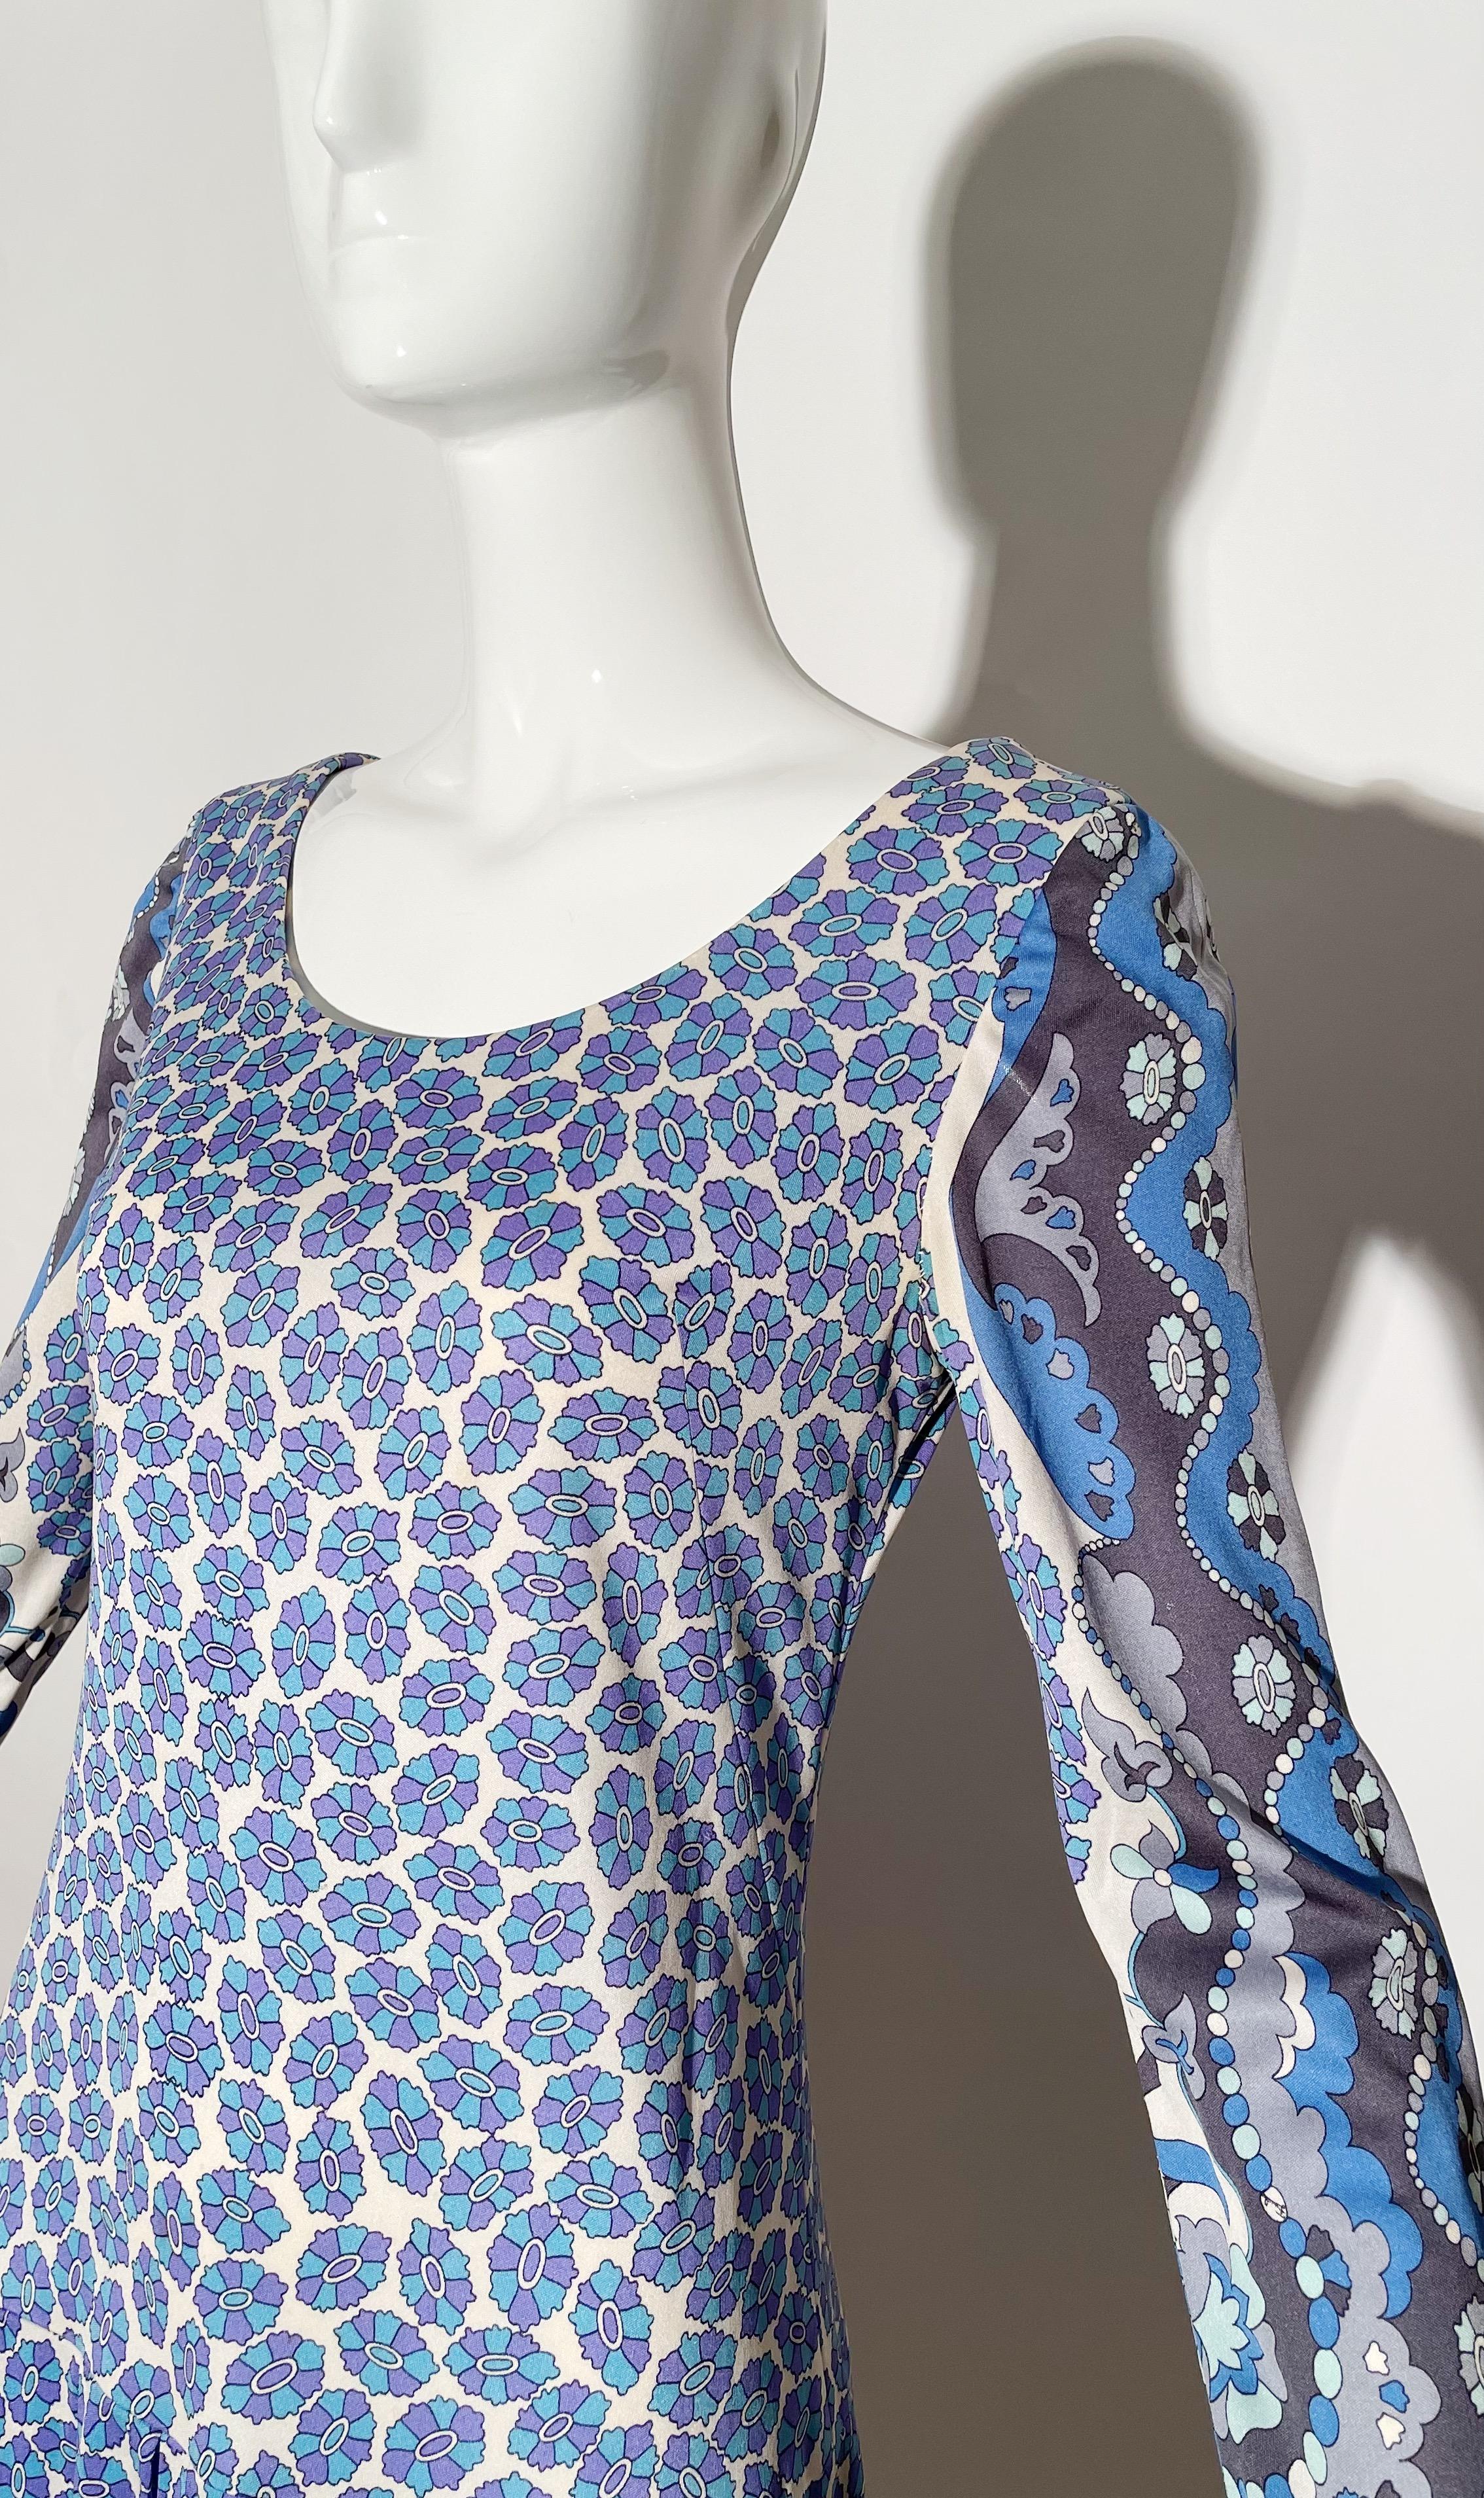 Emilio Pucci Pleated Dress In Excellent Condition For Sale In Los Angeles, CA